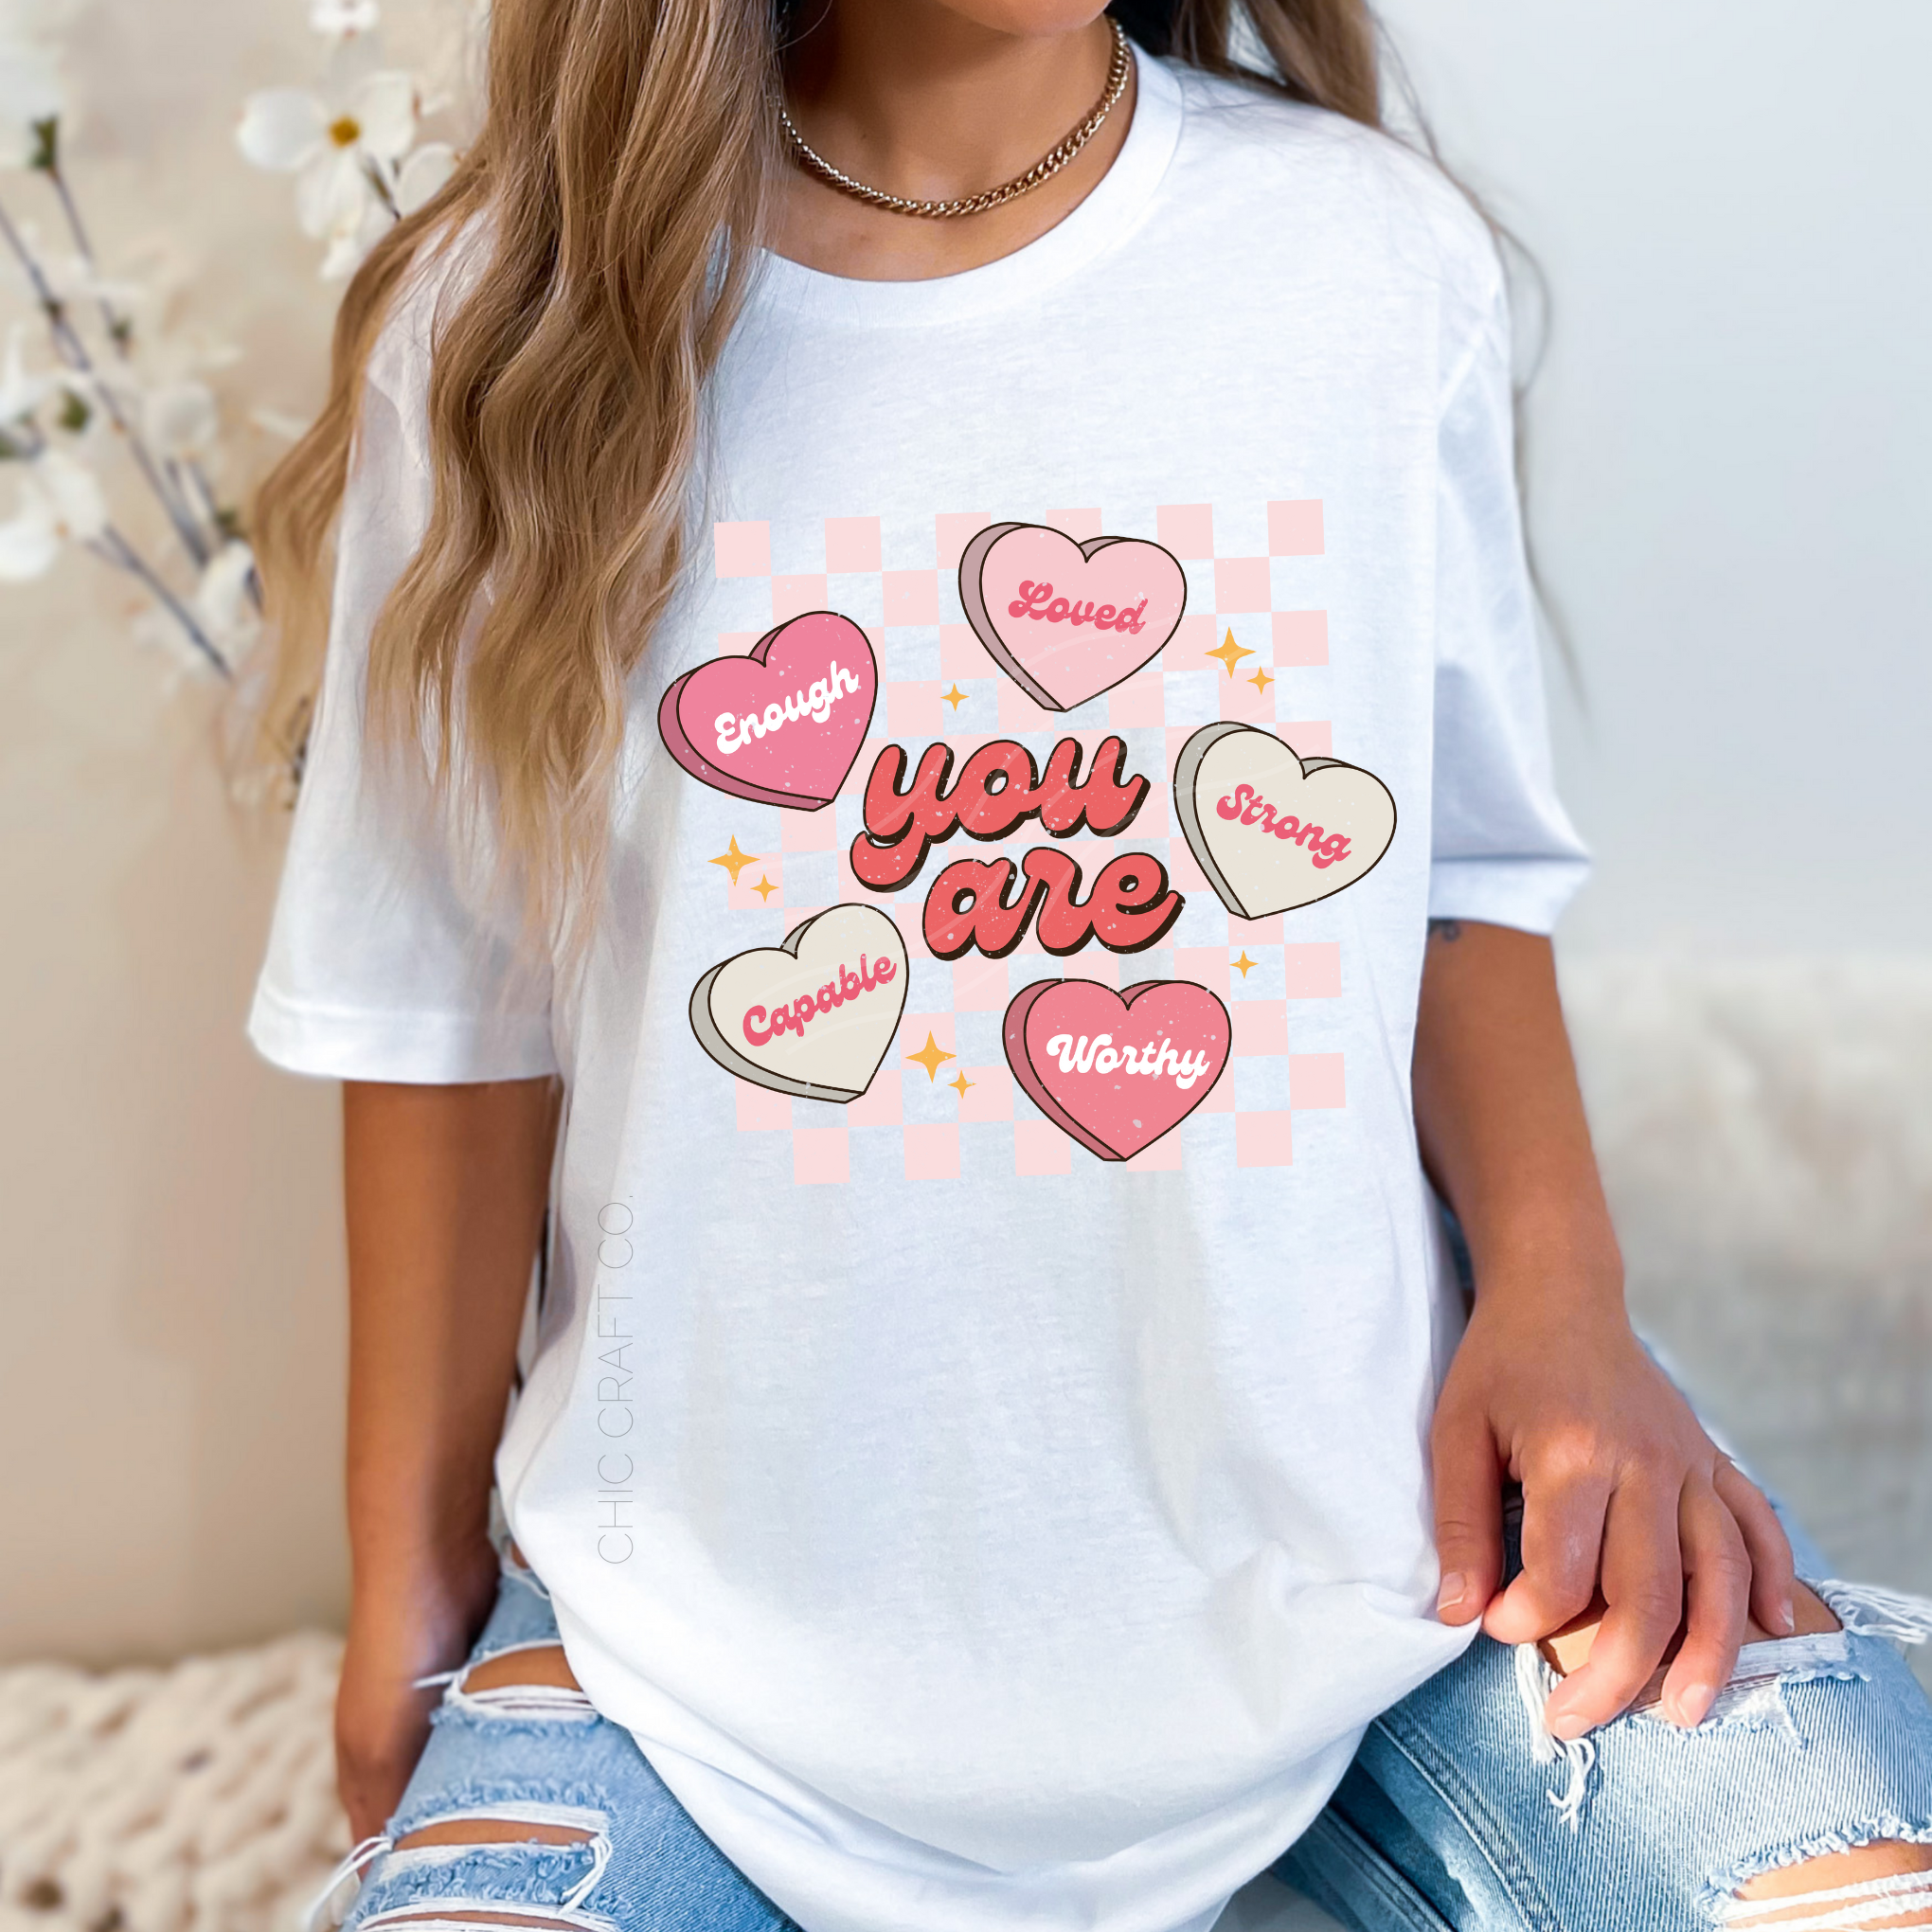 Valentine's Tees! 5 designs to choose from!